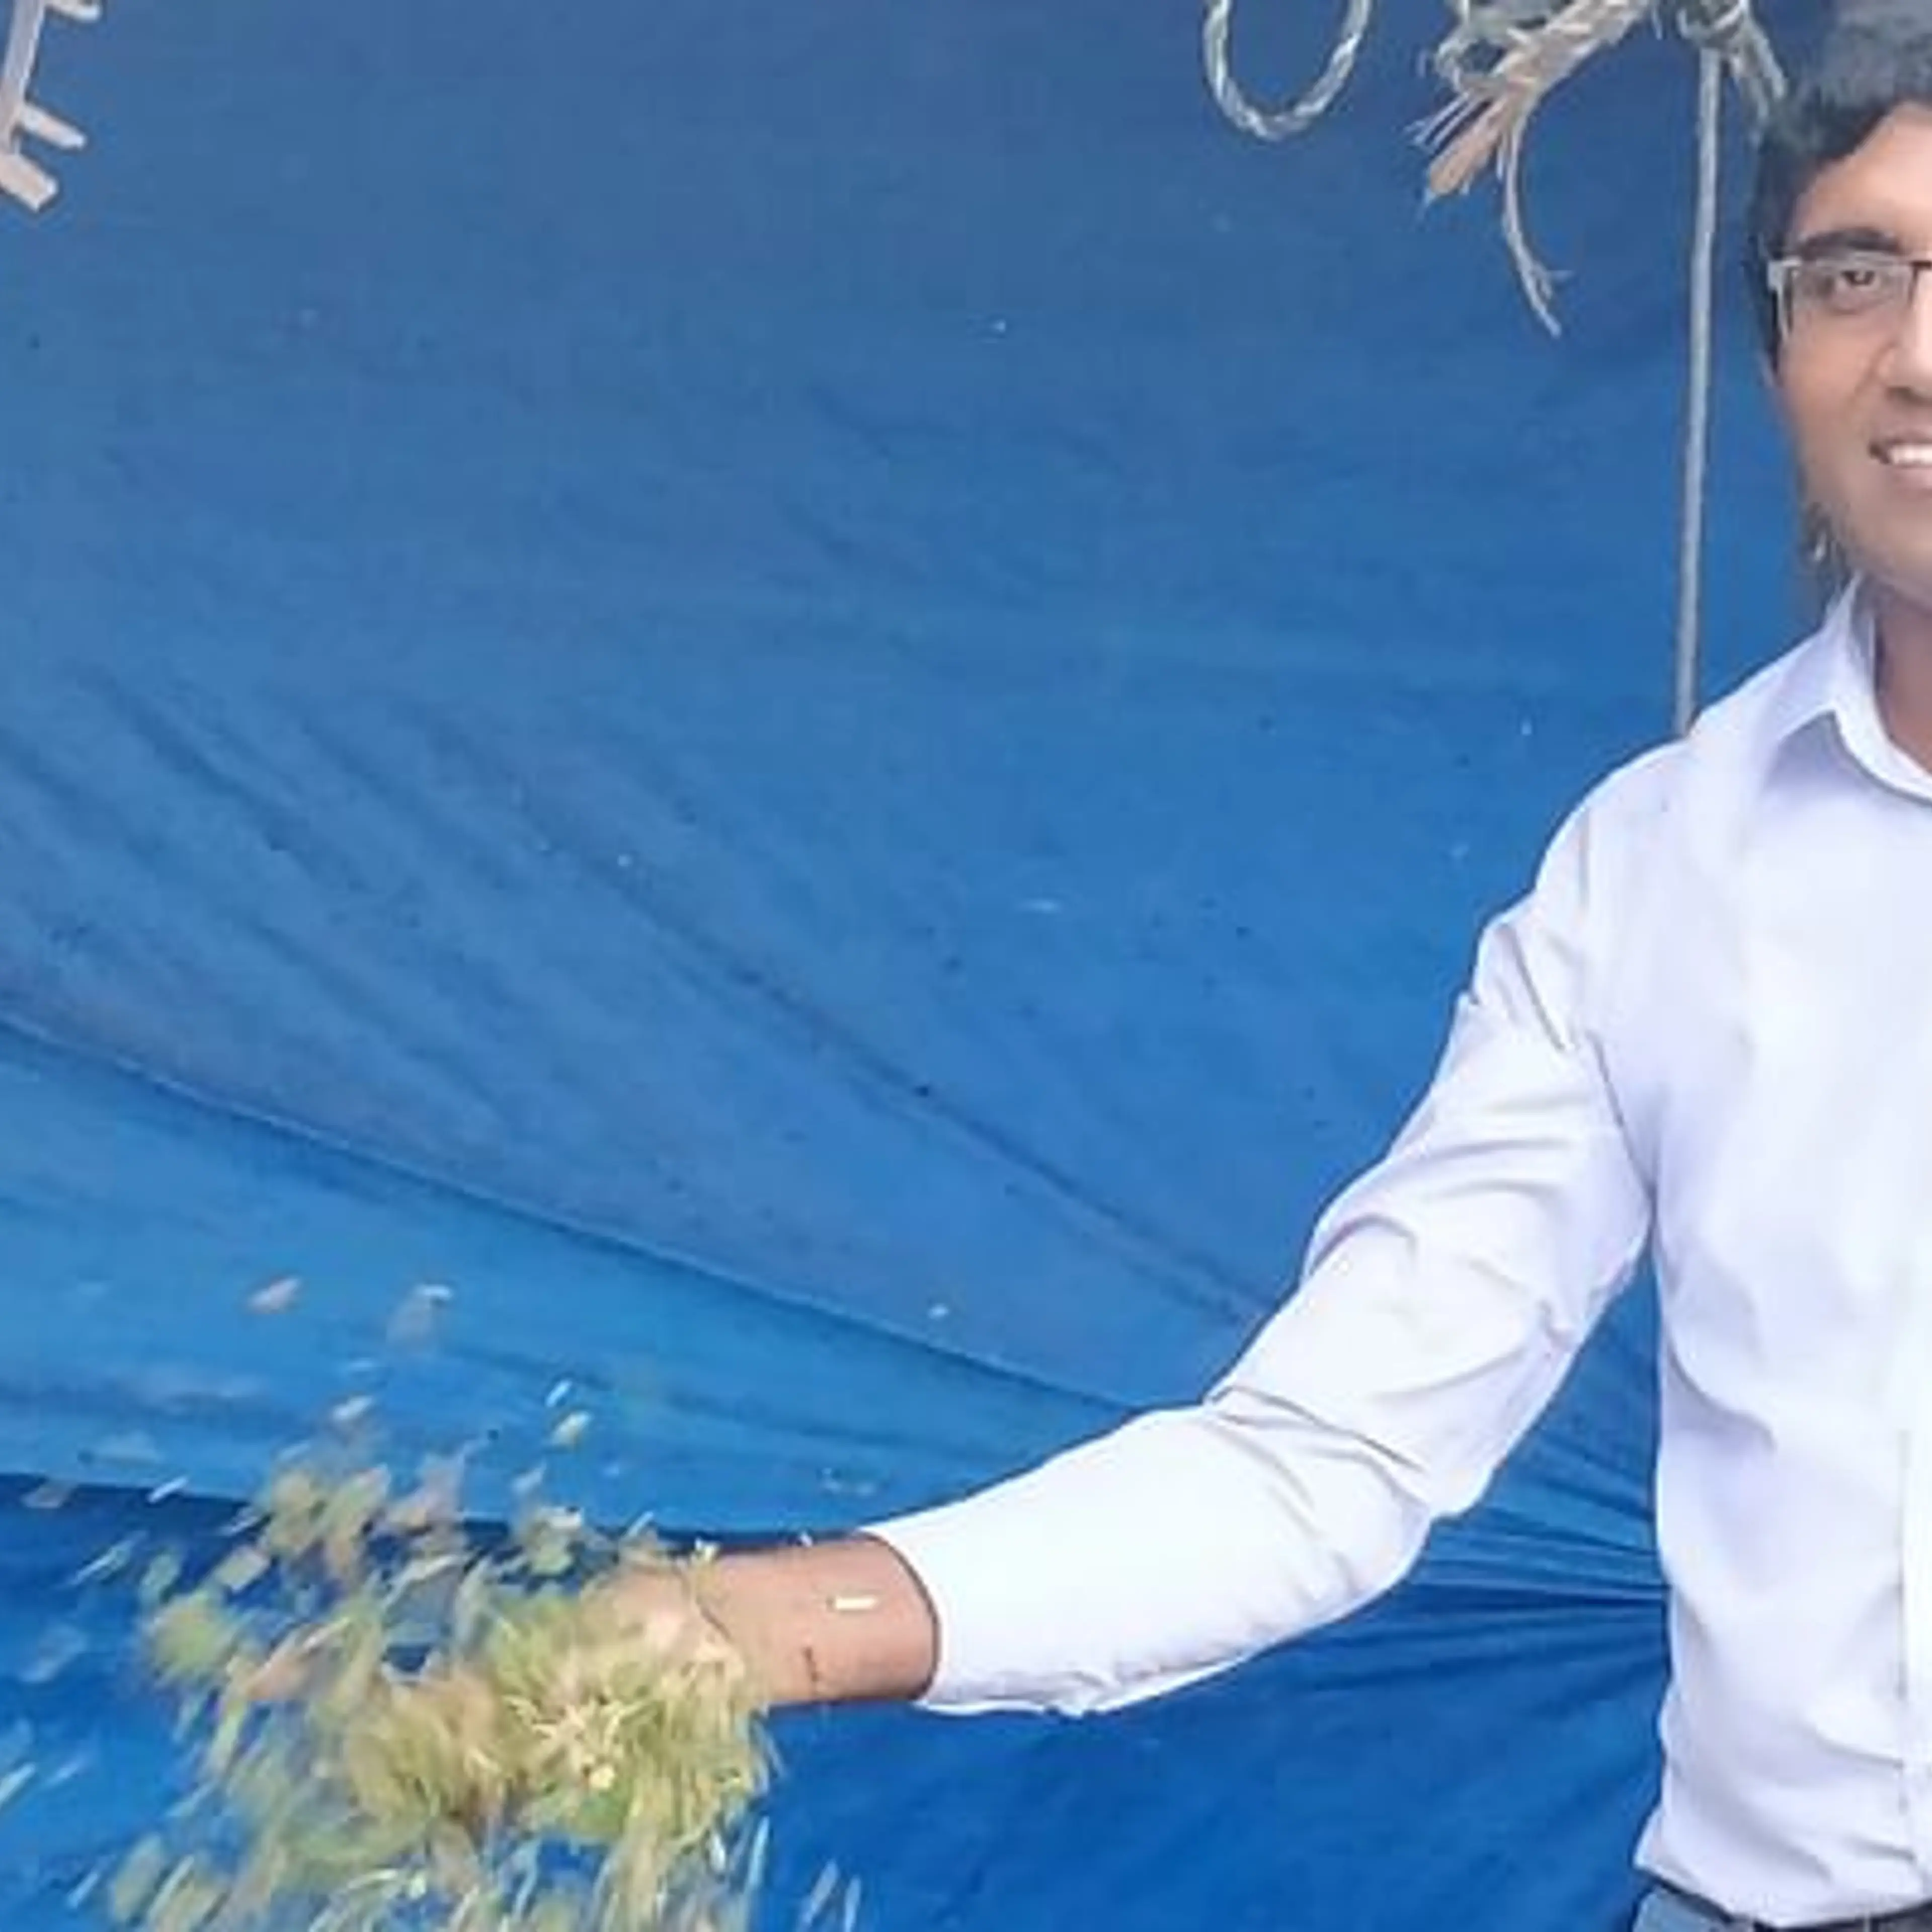 This engineer quit his US job, returned to India and bought 20 cows. Now his dairy brand earns Rs 44 Cr revenue